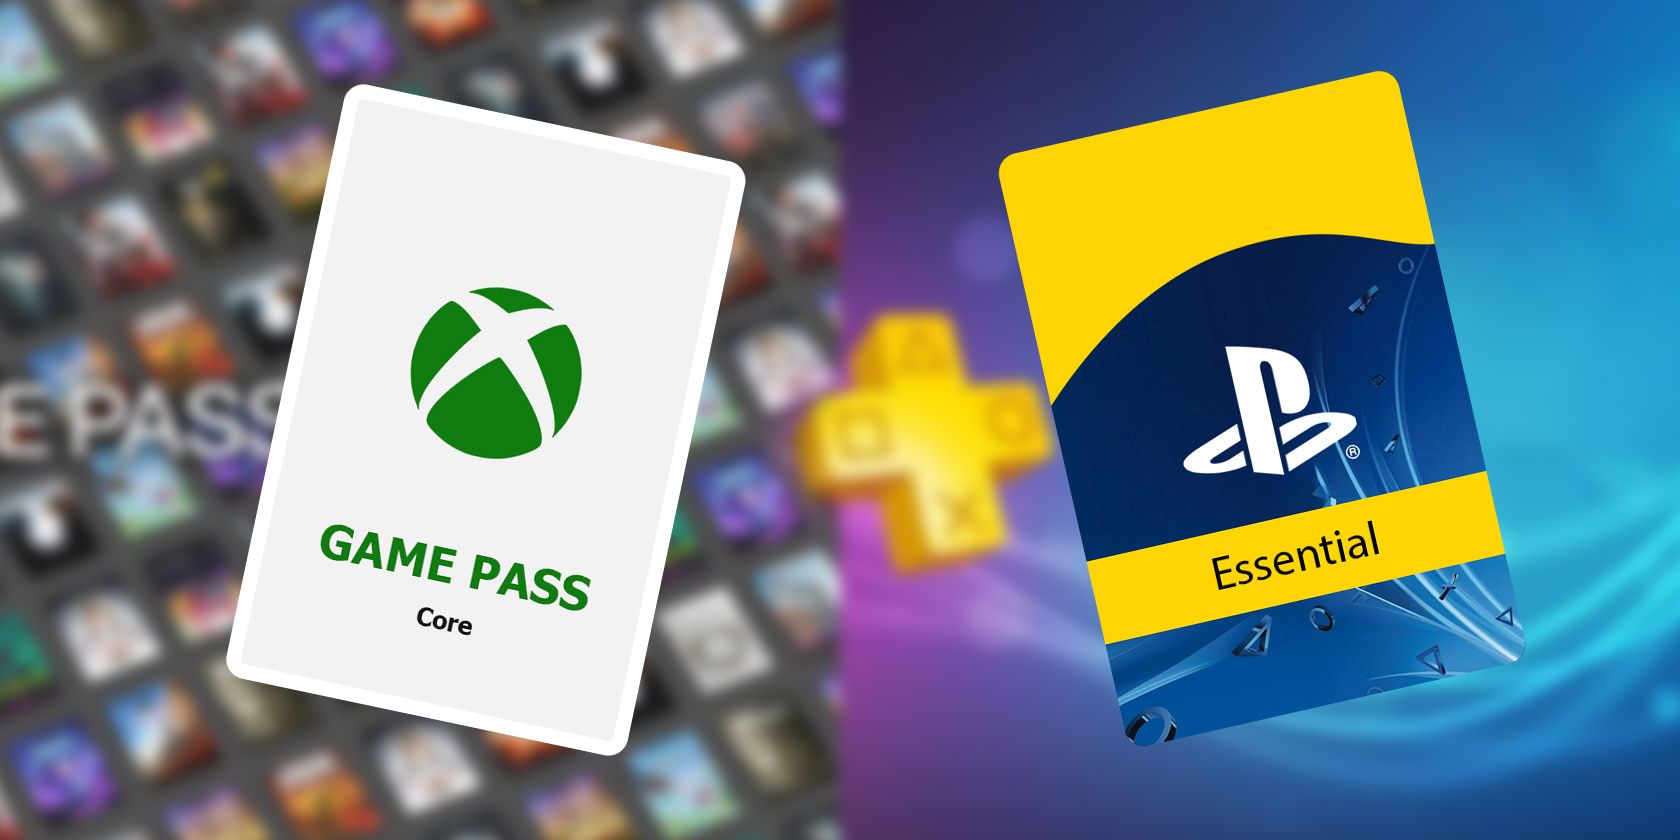 XBox Game Pass and PS Plus Essential cards